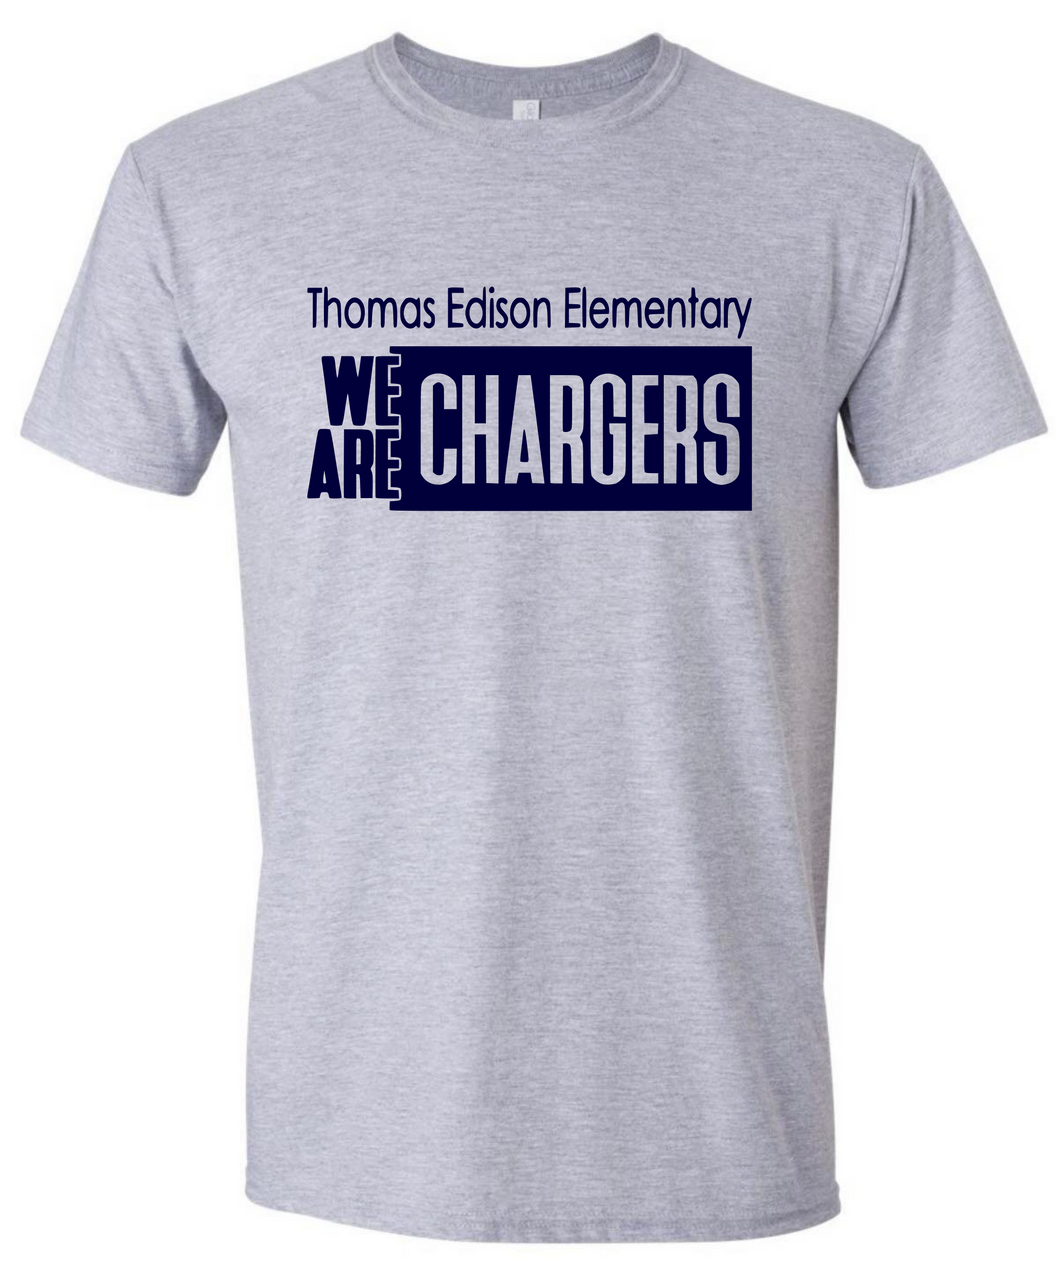 We Are Chargers Tshirt